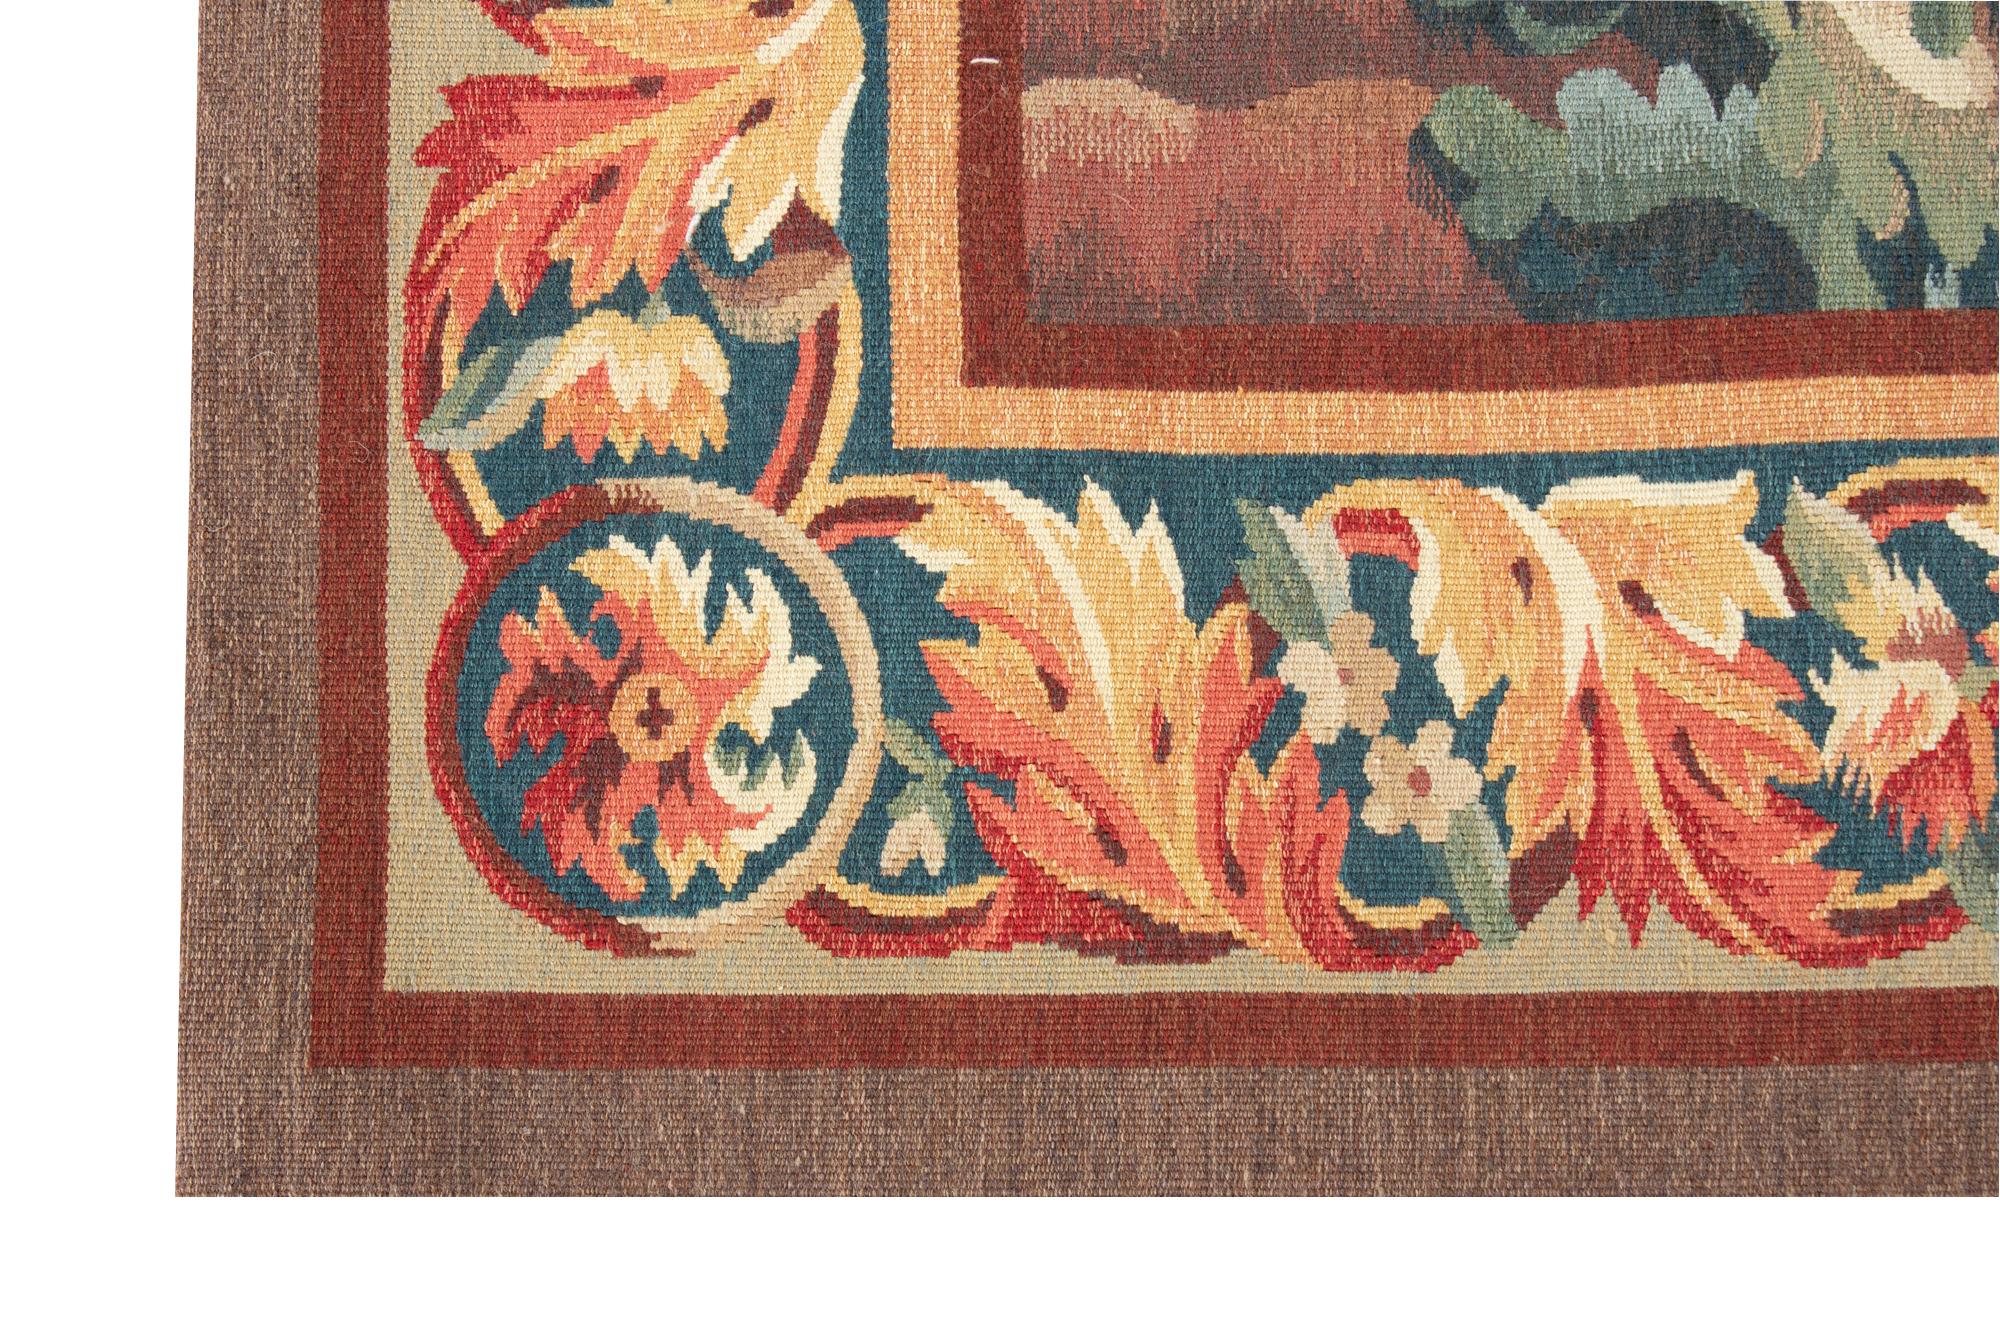 A graceful verdure tapestry in the style of those woven in the 18th century at Aubusson; one of the chief tapestry weaving towns in France. In this period landscapes with trees, birds and rivers were popular, and often included graceful